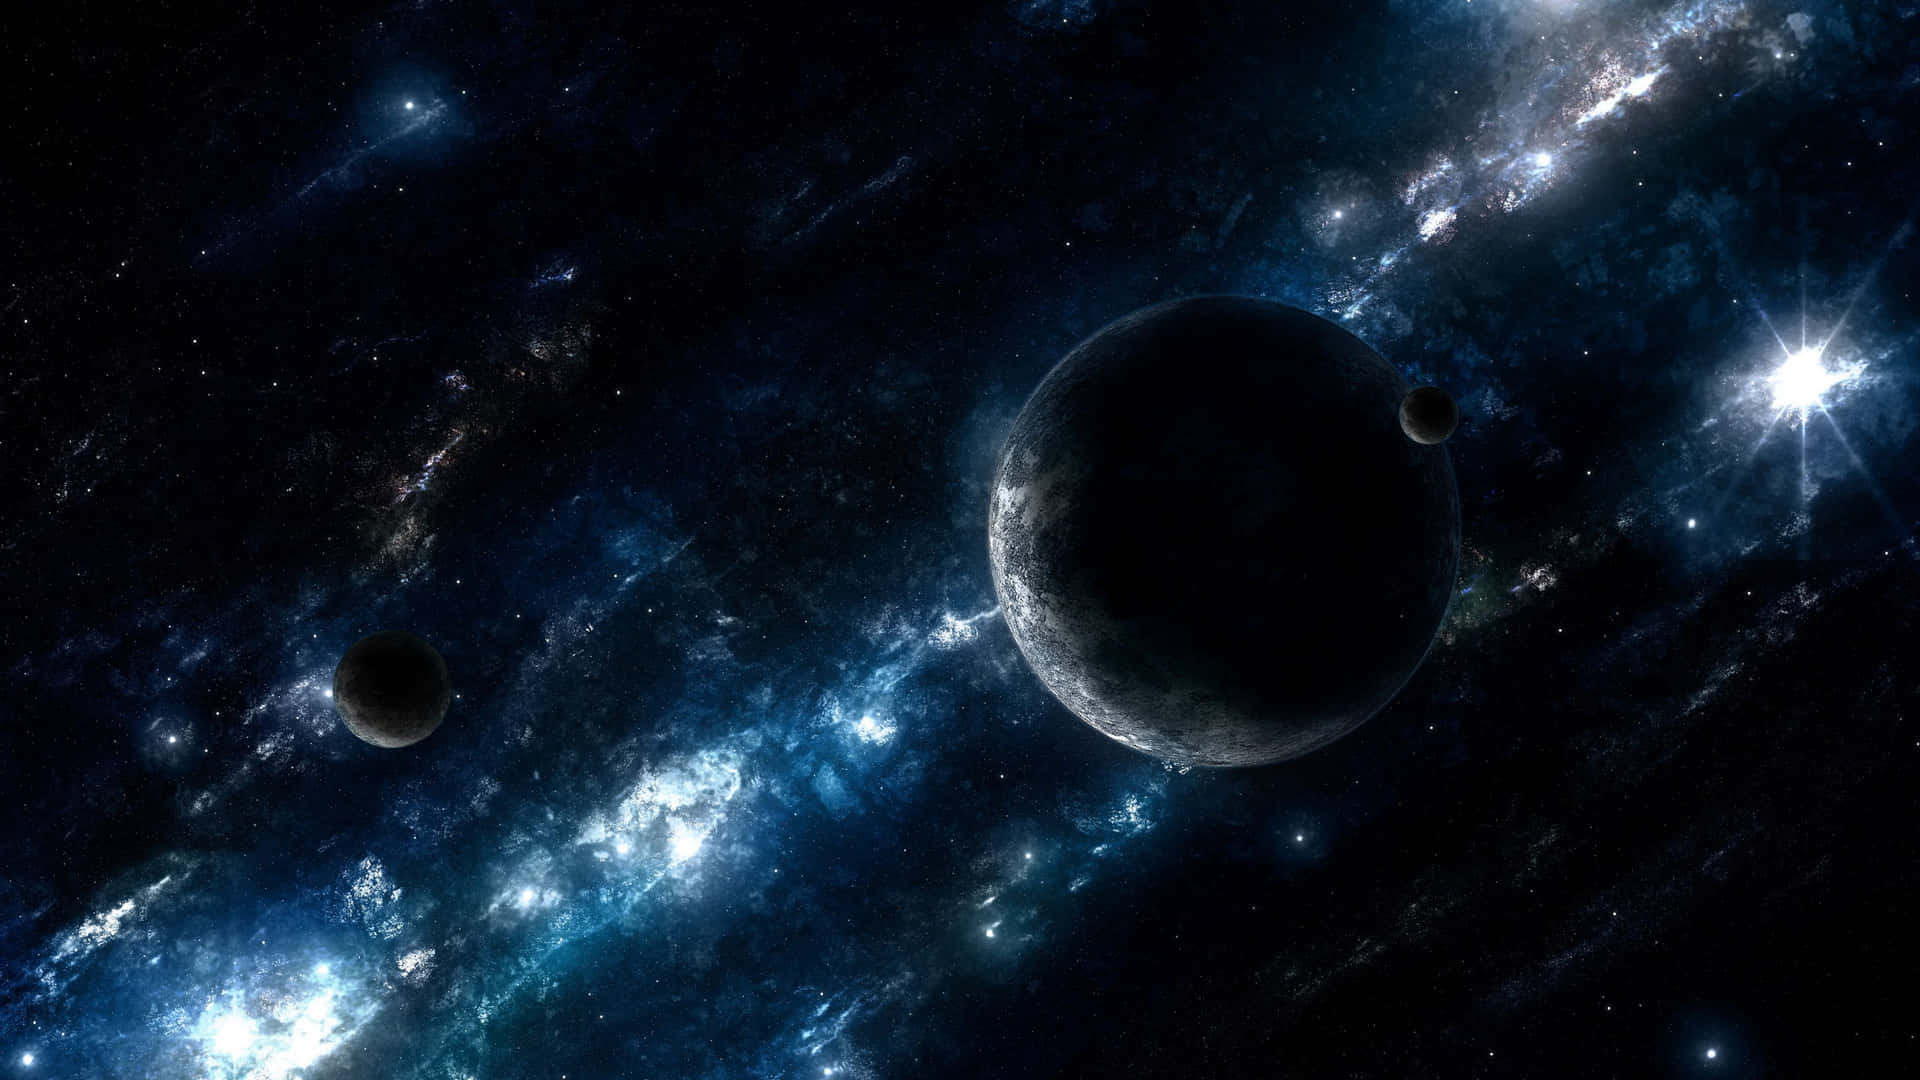 Explore the Wonders of Space with this Animated Space Background